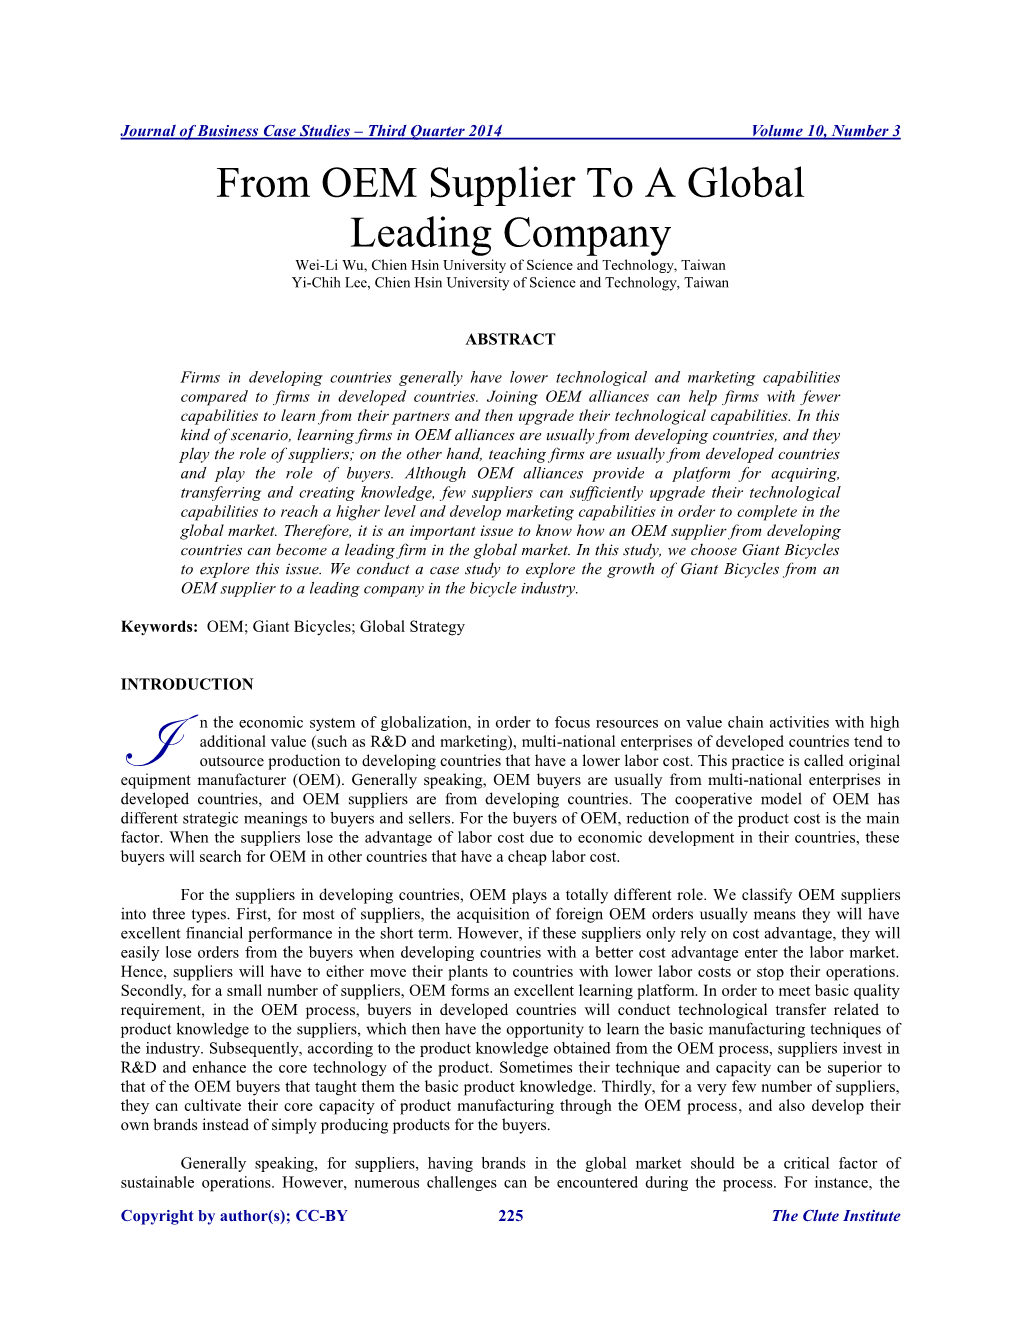 From OEM Supplier to a Global Leading Company